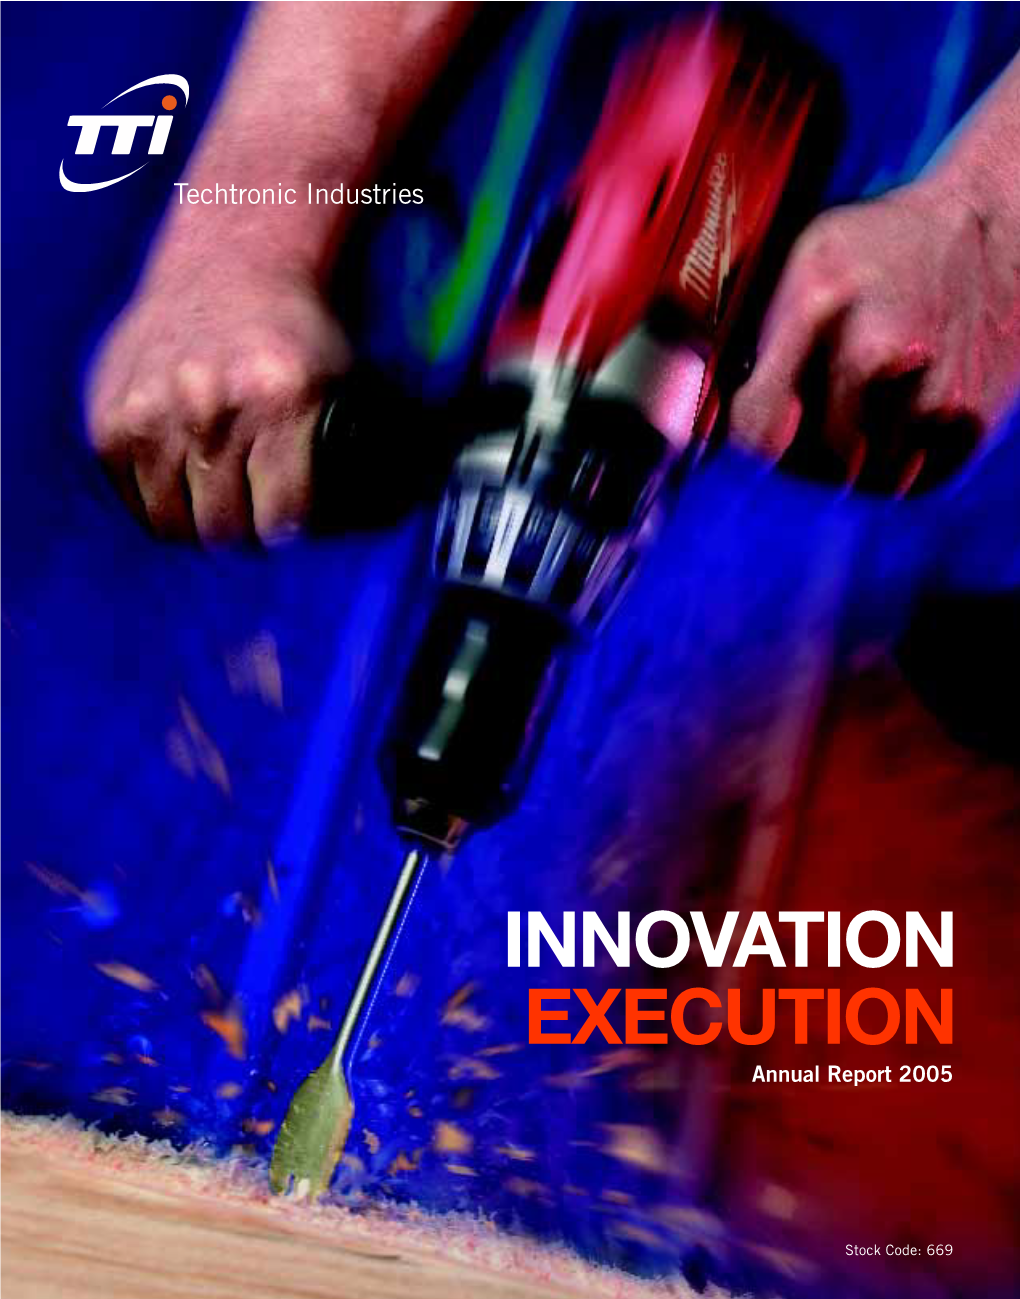 INNOVATION EXECUTION Annual Report 2005